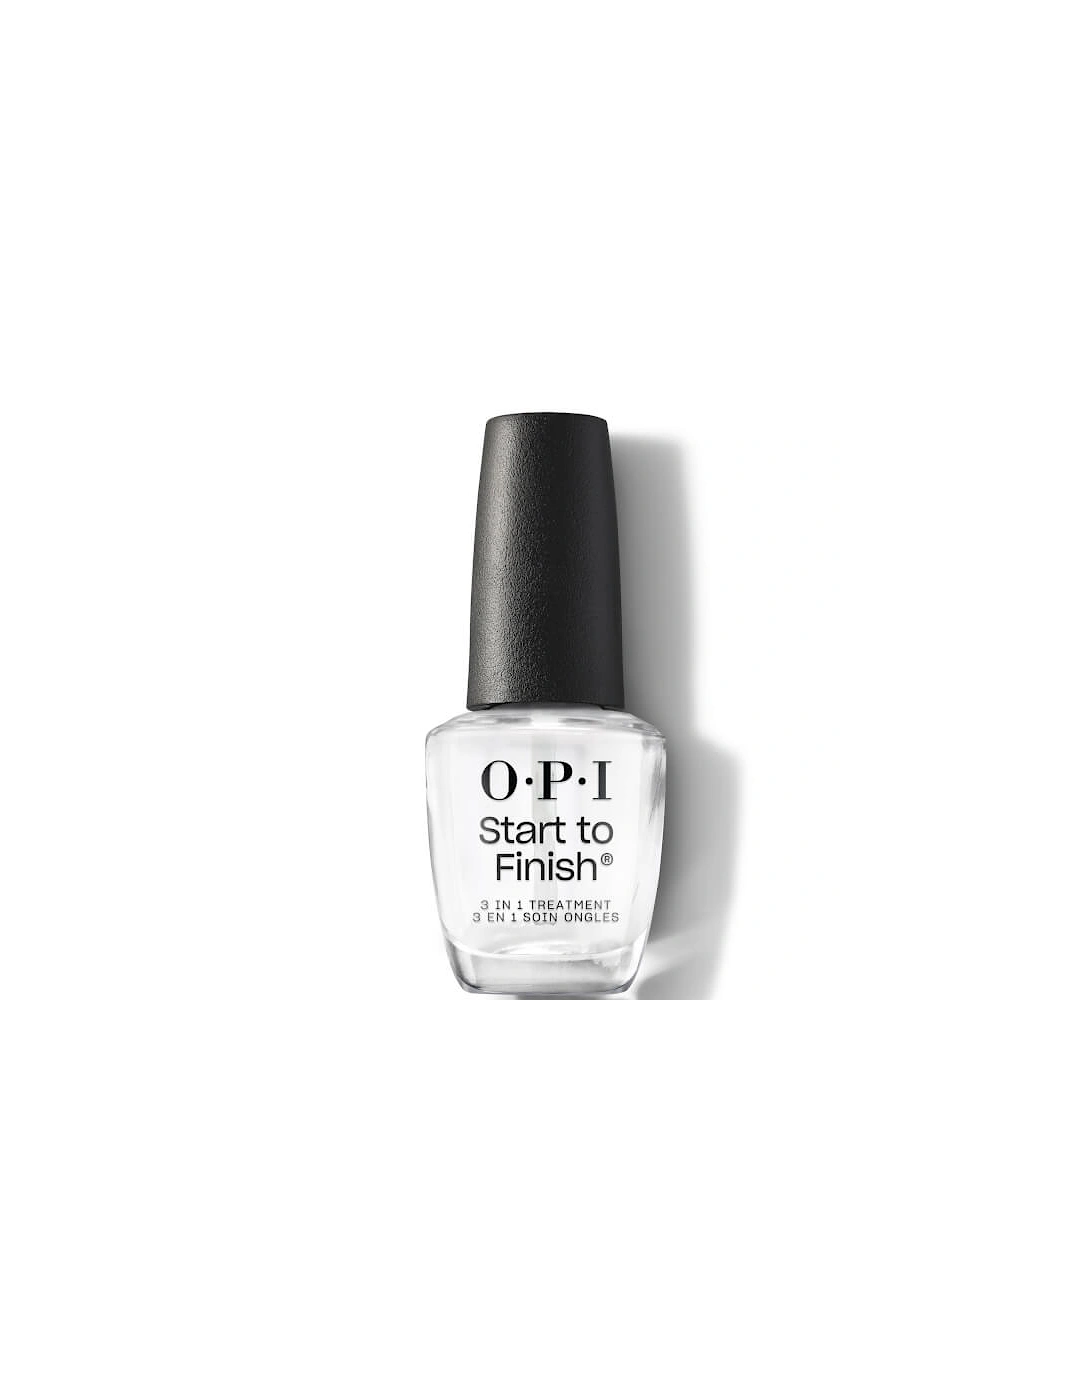 Start to Finish 3-in-1 Treatment - Base Coat - Top Coat - Nail Strengthener 15ml, 2 of 1